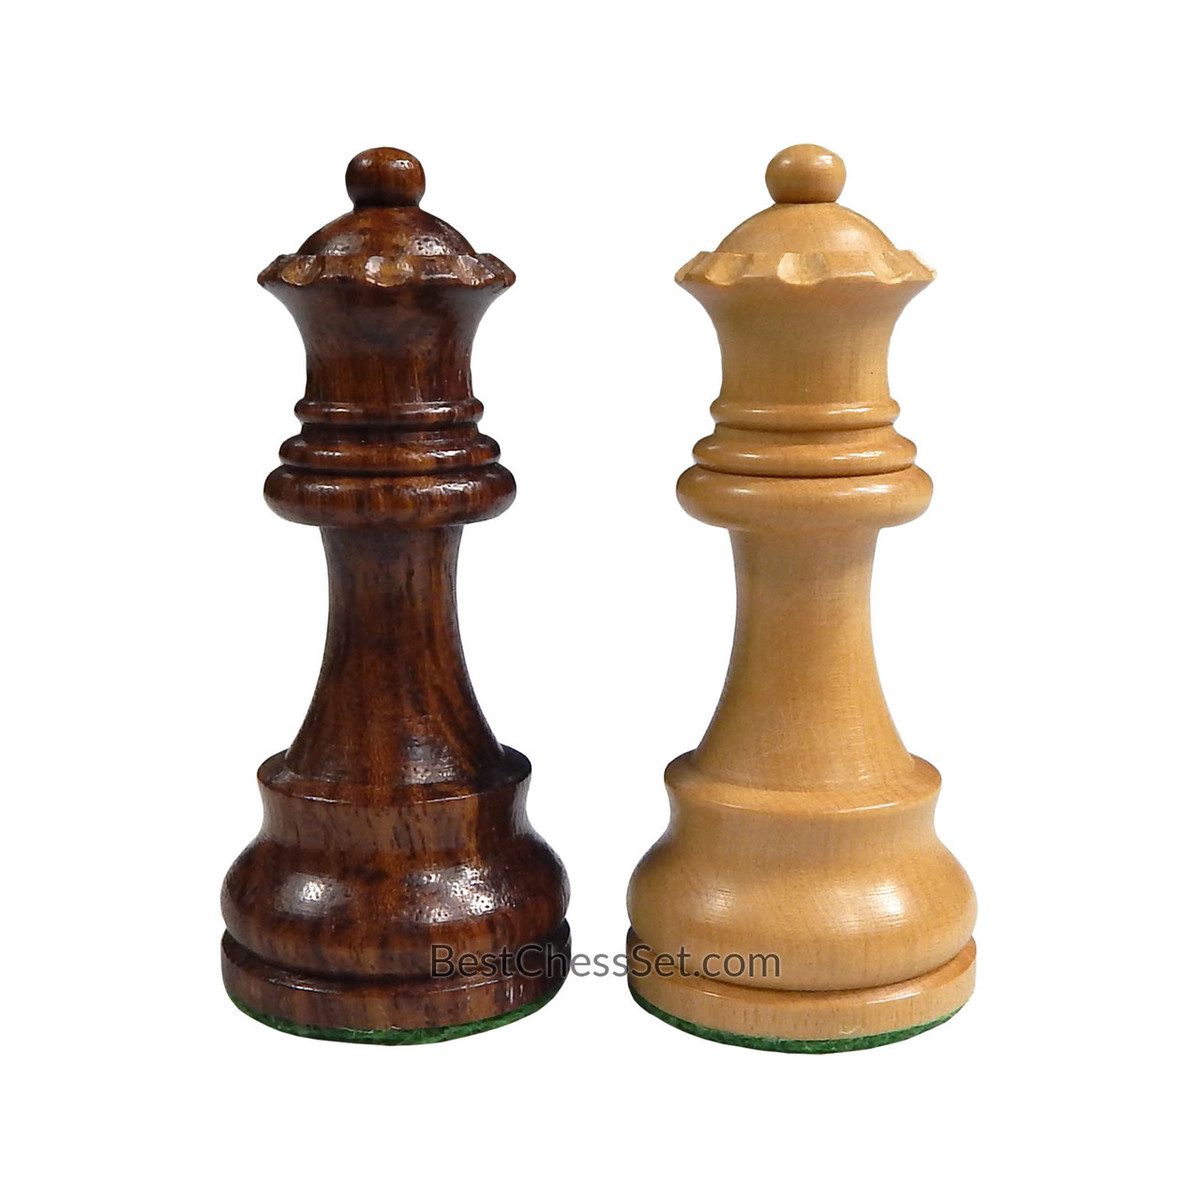 Full Set 34 Khaki Gold & Pink 4 Queens Details about   Staunton Single Weight Chess Pieces 